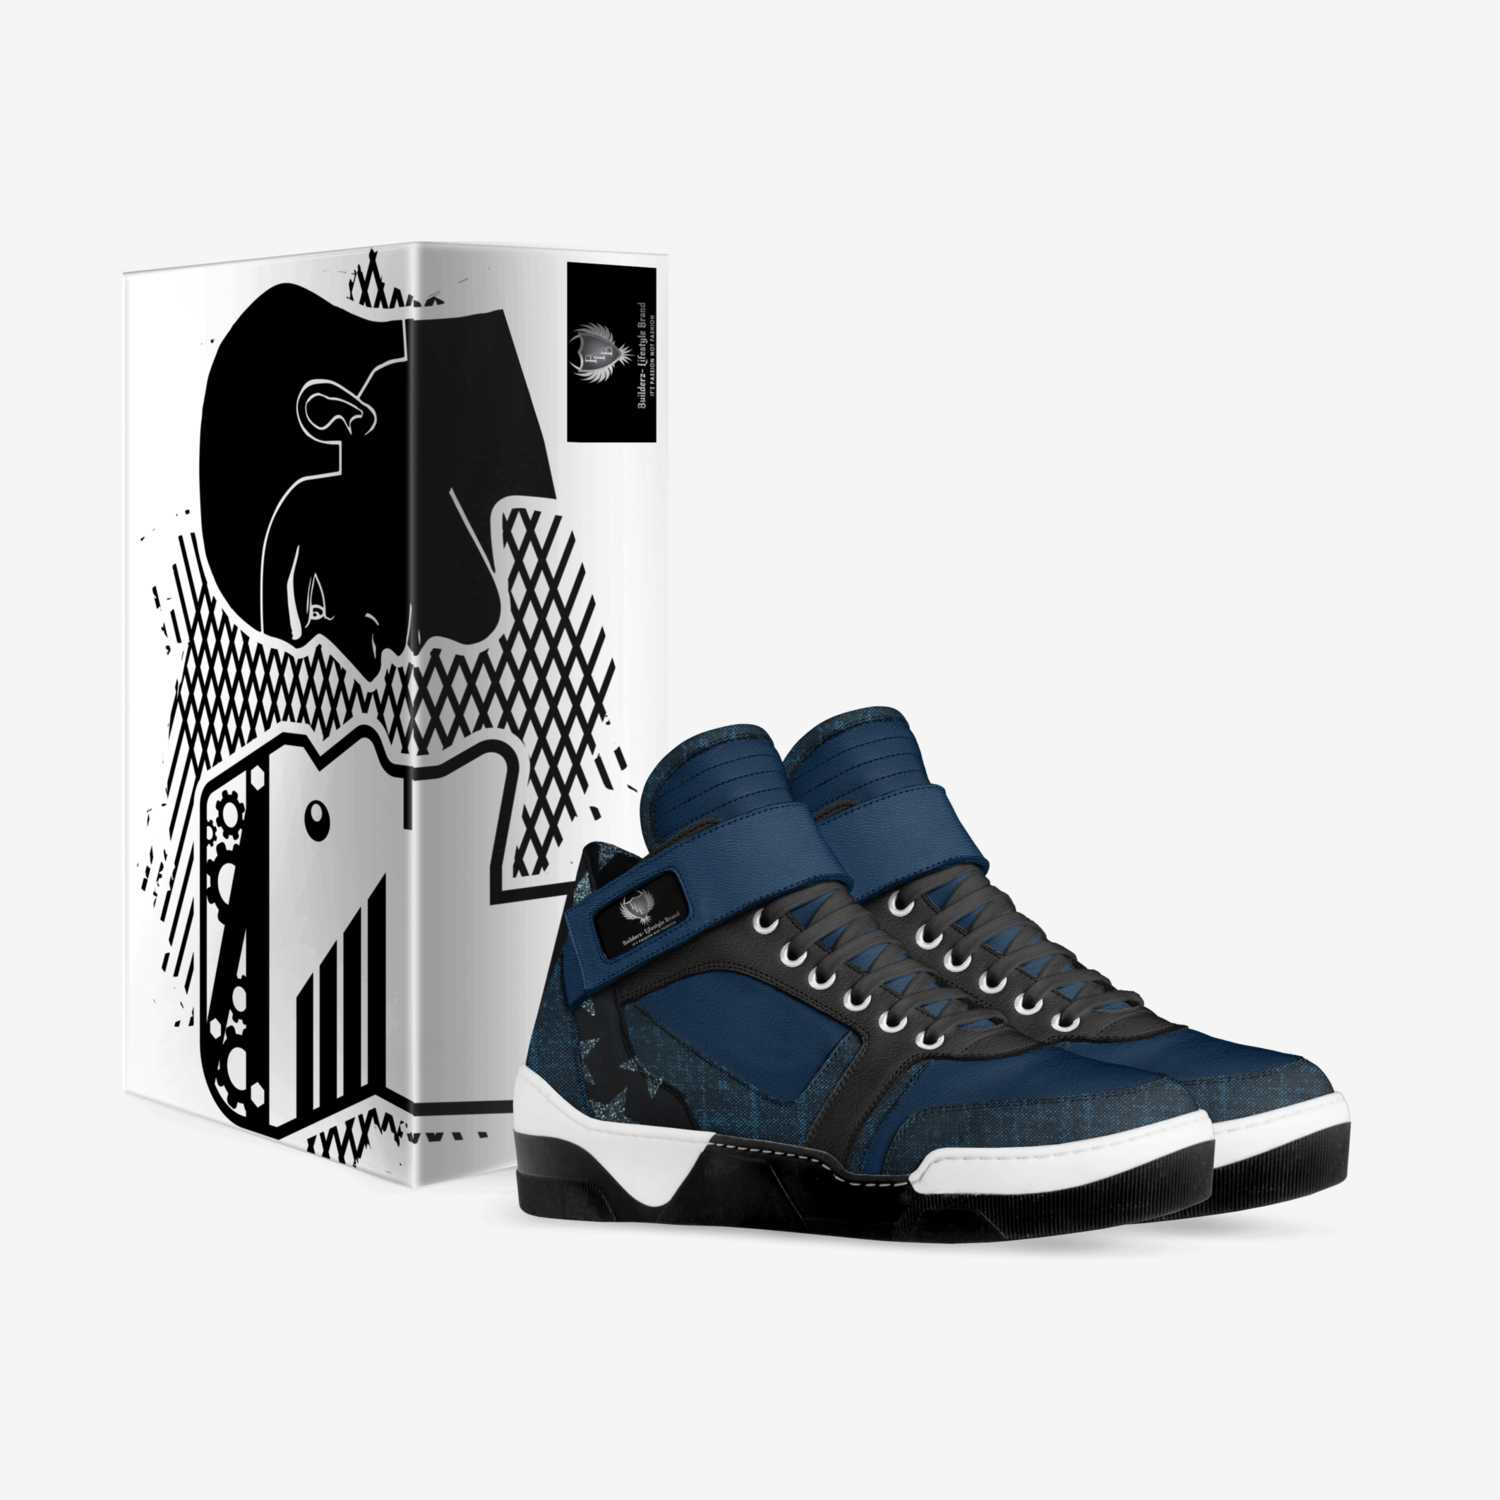 BUILD P.R.I.N.T.Z custom made in Italy shoes by Anthony Barber (tha Builder) | Box view